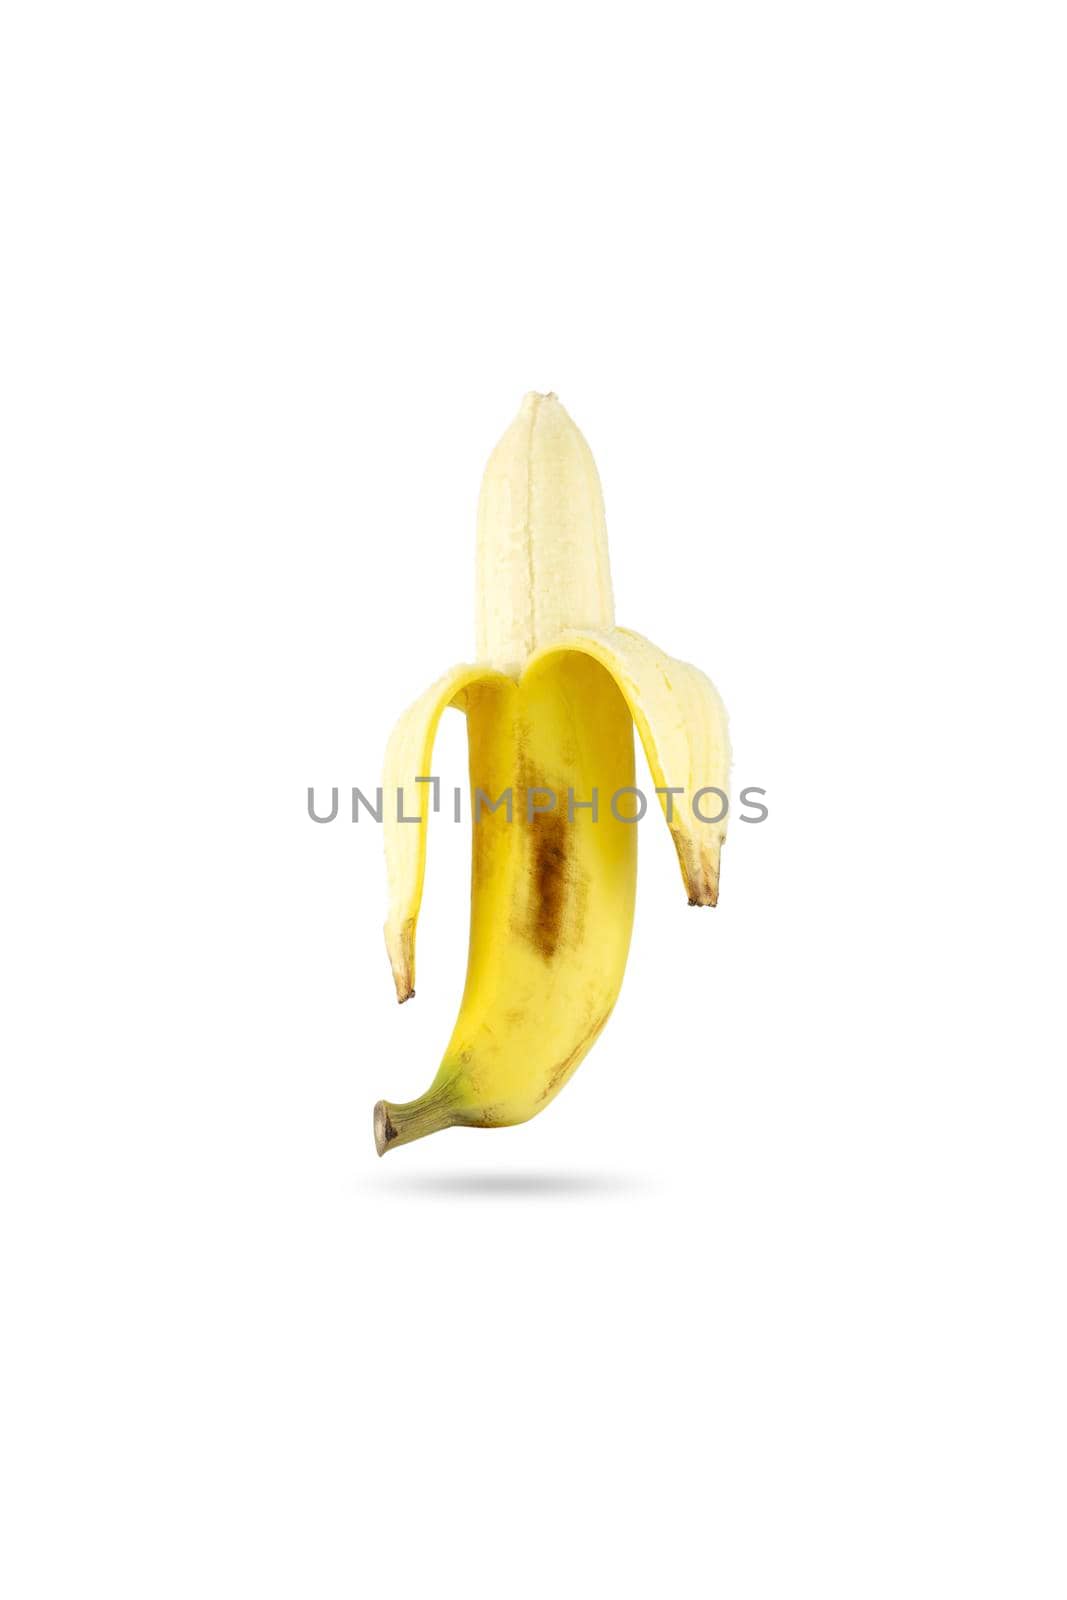 Single ripe yellow color banana isolated on white background.